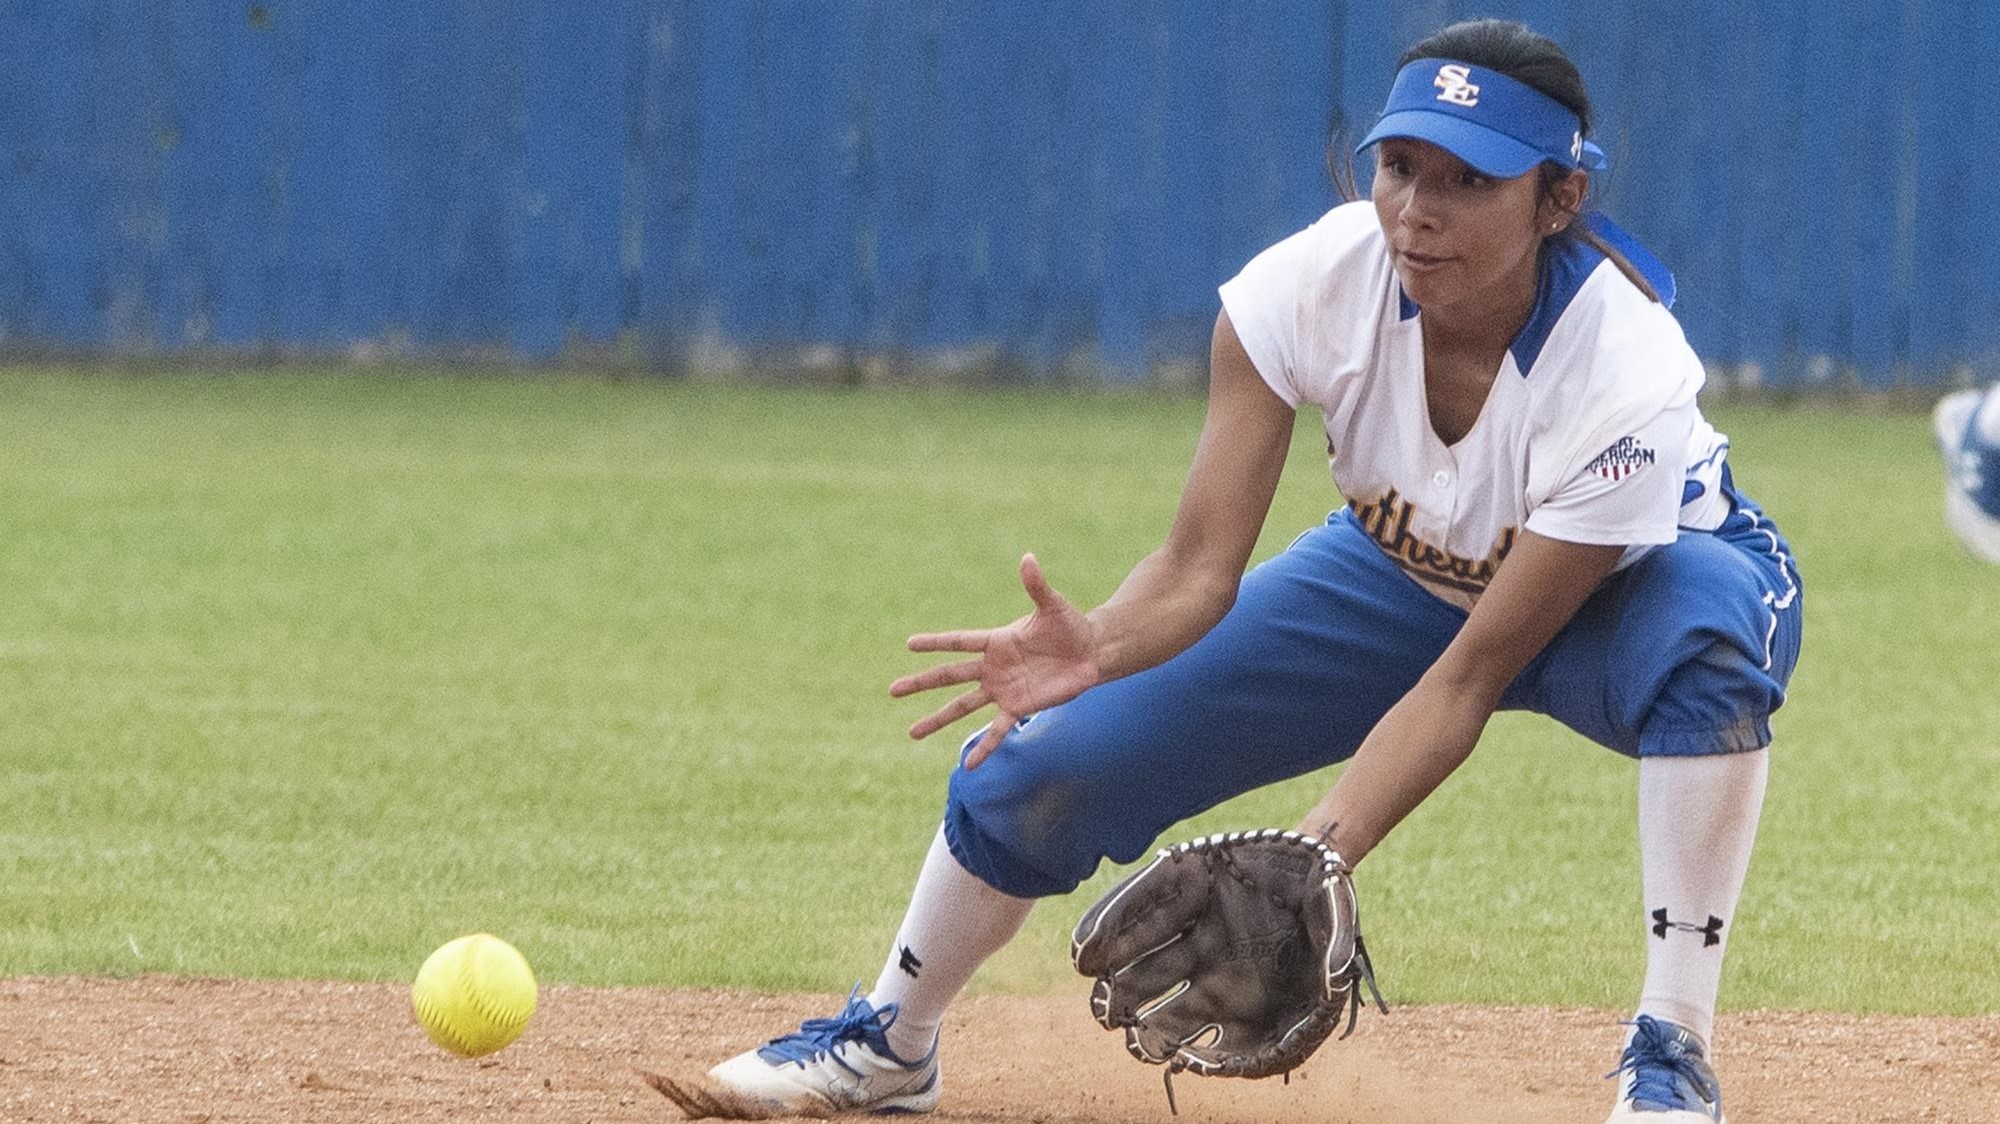 Symphoni Shomo (Choctaw/Cheroke) led the way for Southeastern with a pair of hits and added four stolen bases